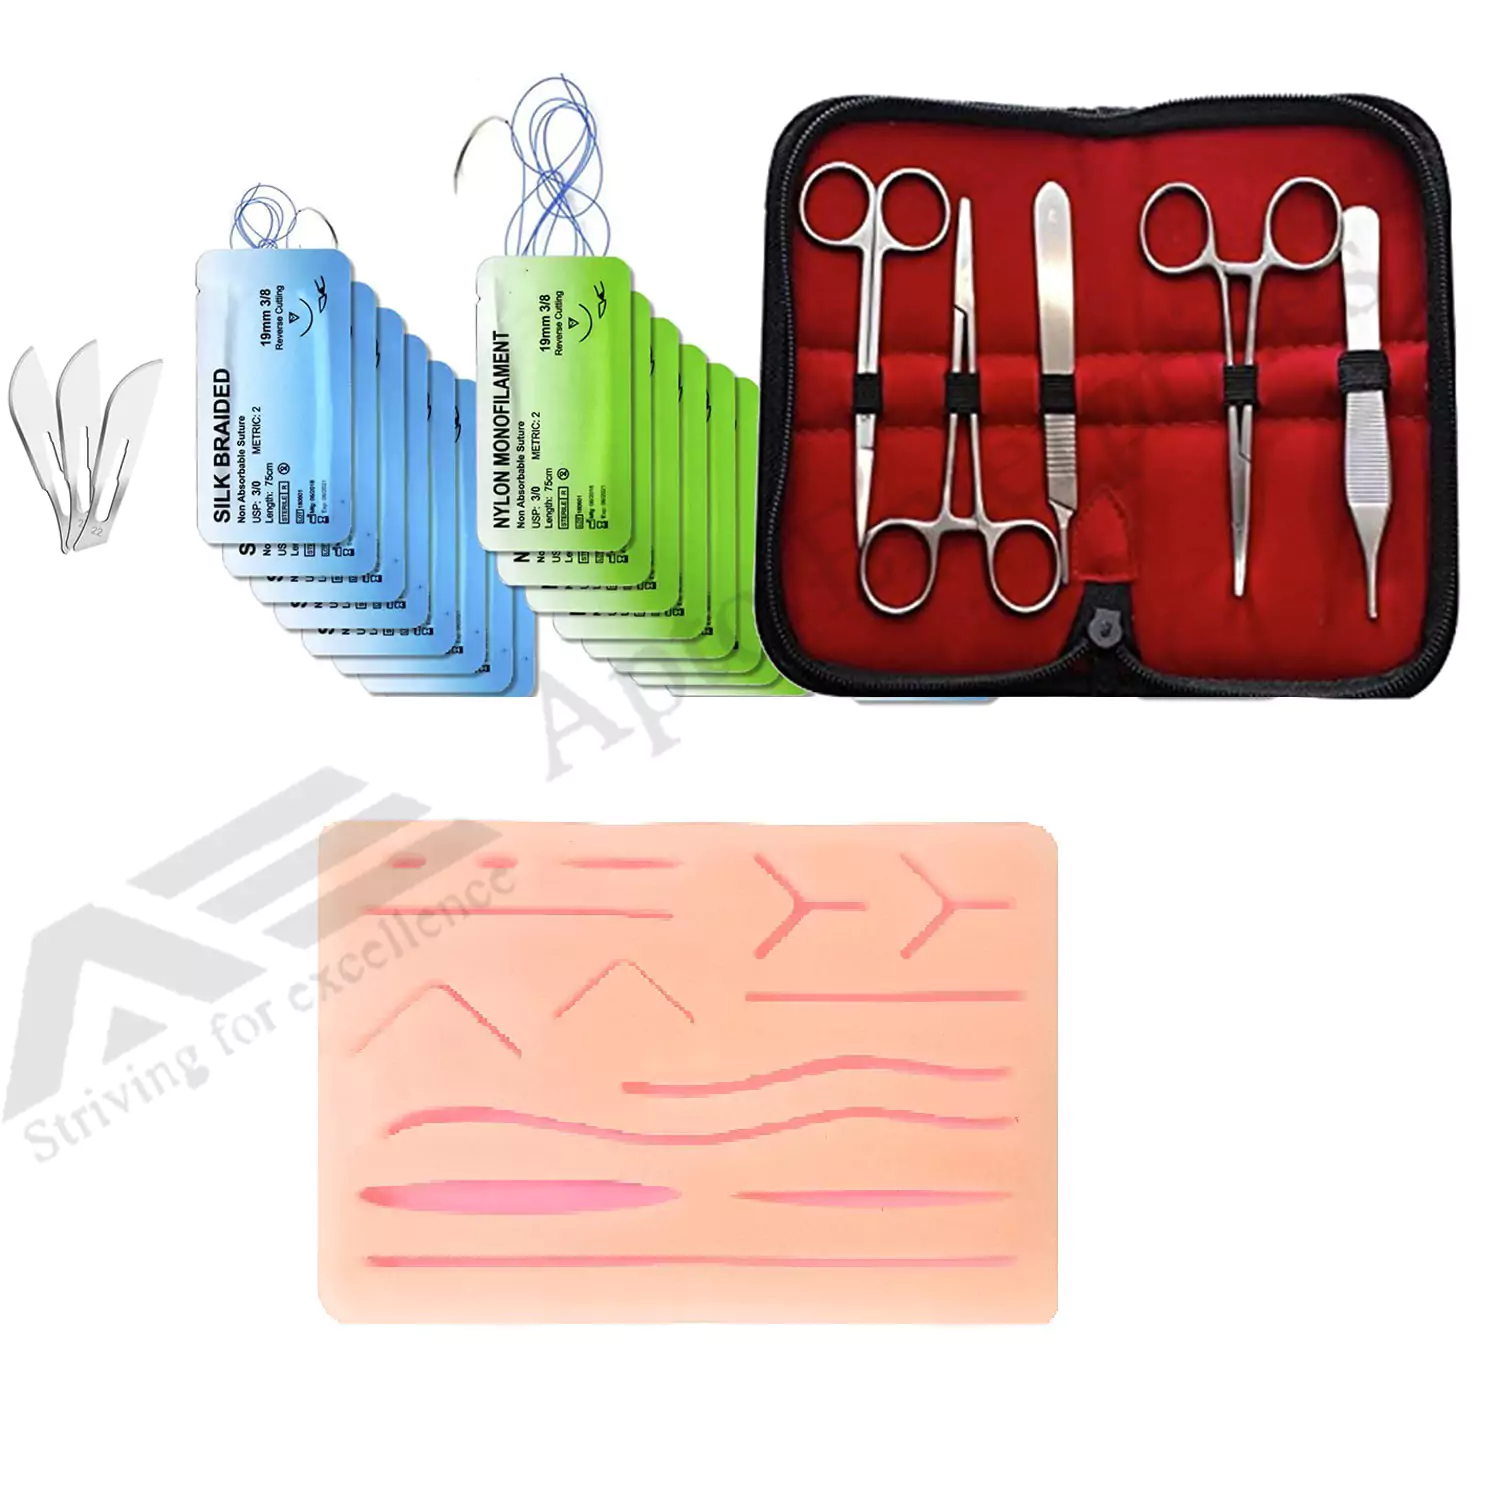 Essential Suture Practice Kit with Nylon and Silk Threads